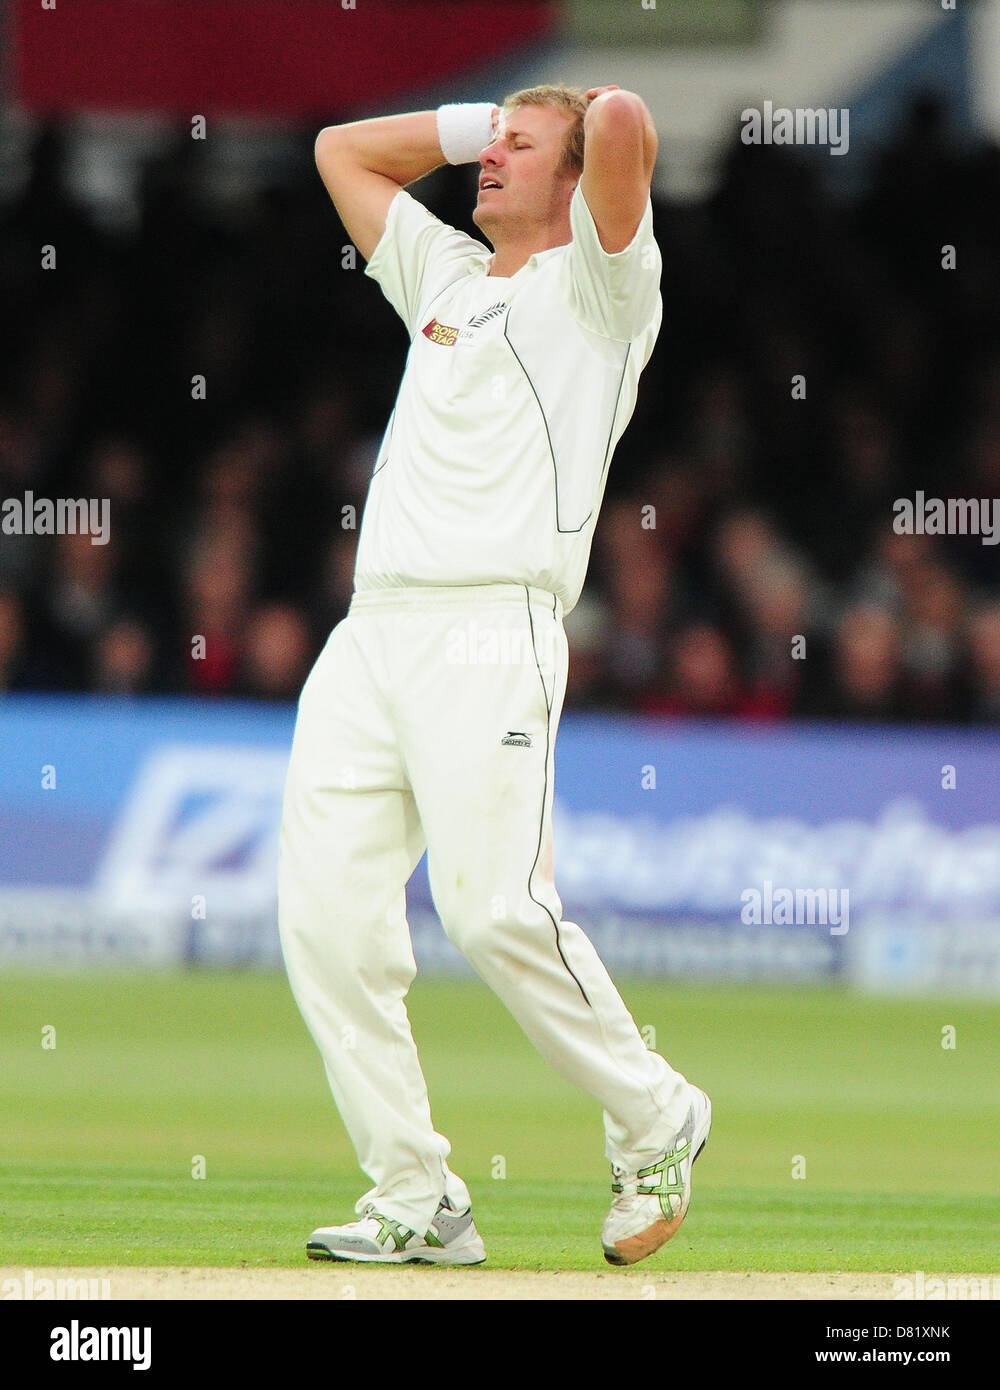 17.05.2013 London, England. Neil Wagner in action during the 1st Test between England and New Zealand from Lords Cricket Ground. Stock Photo